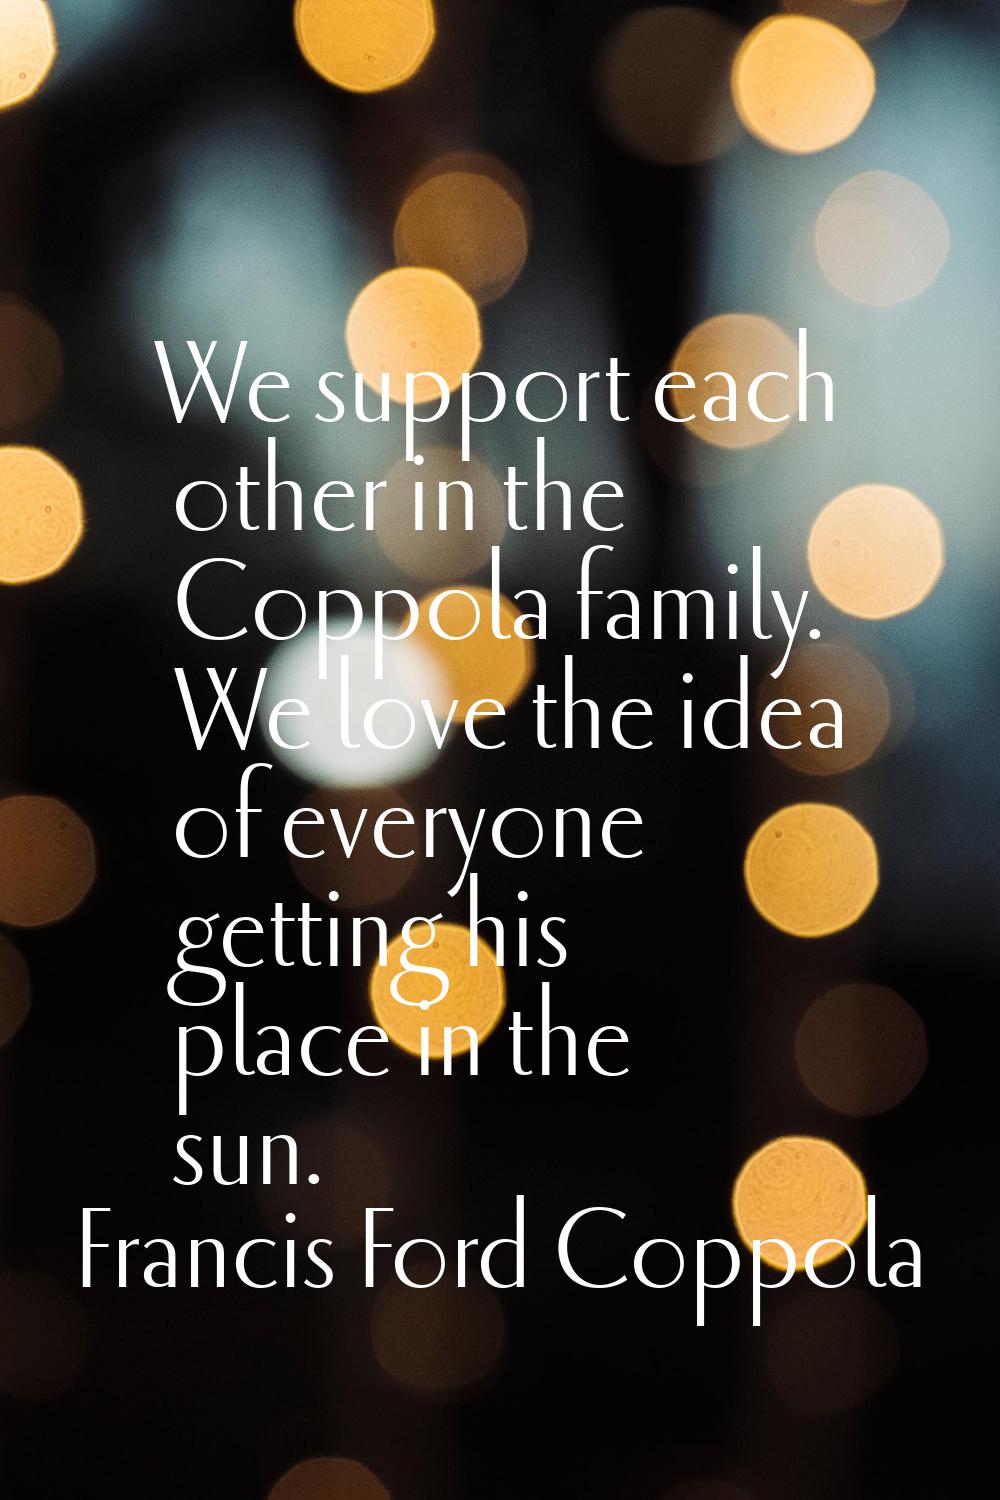 We support each other in the Coppola family. We love the idea of everyone getting his place in the 